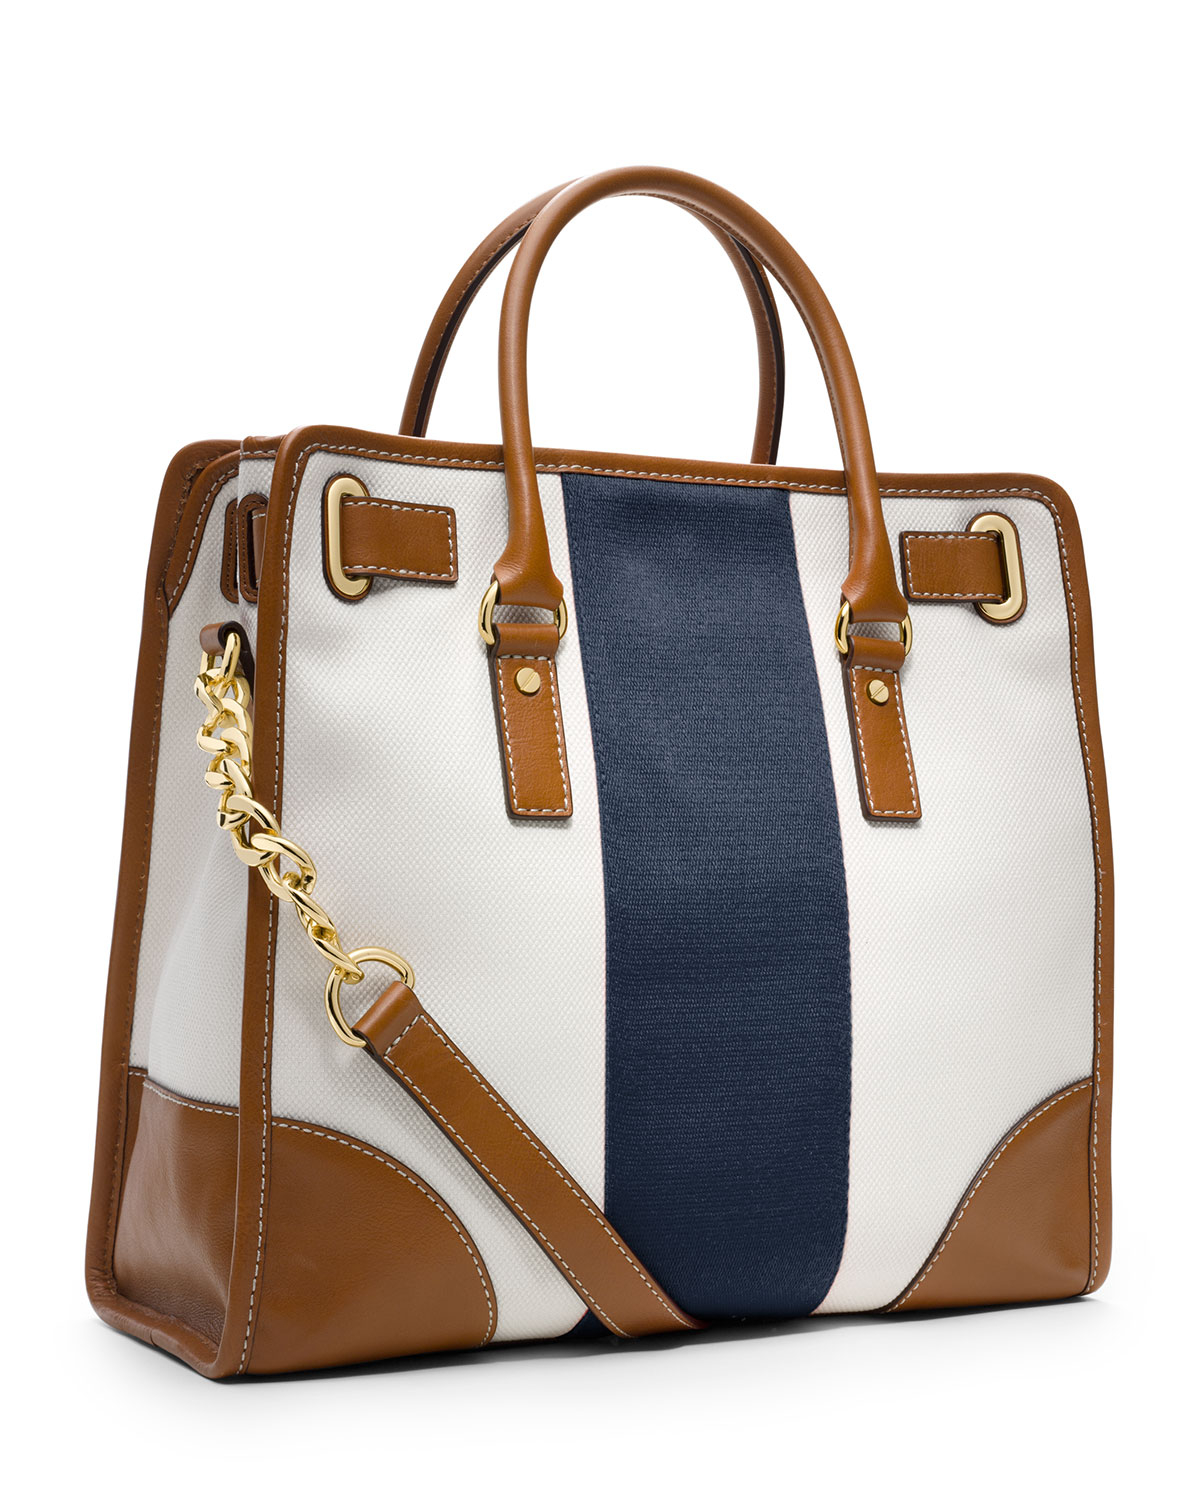 Lyst - Michael Kors Michael Large Hamilton Striped Canvas Tote in Blue